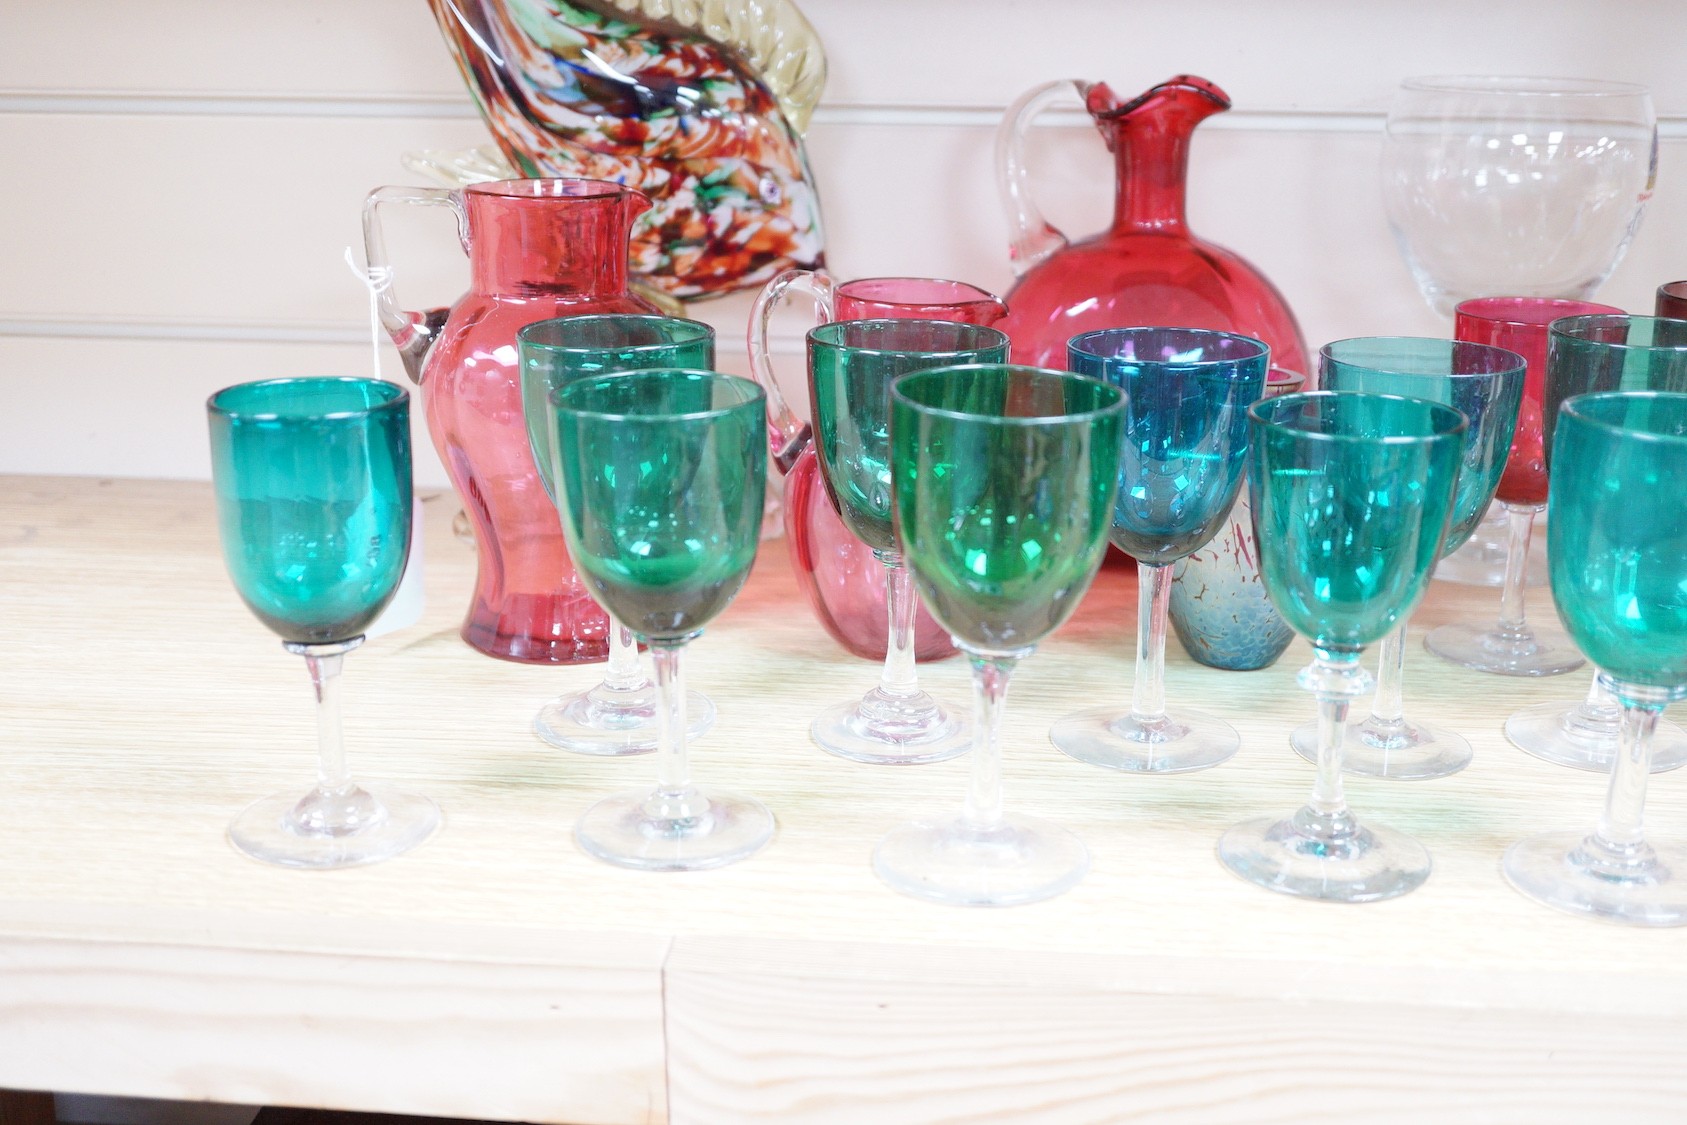 A quantity of cranberry glass, together with other coloured glassware and a Murano style fish ornament